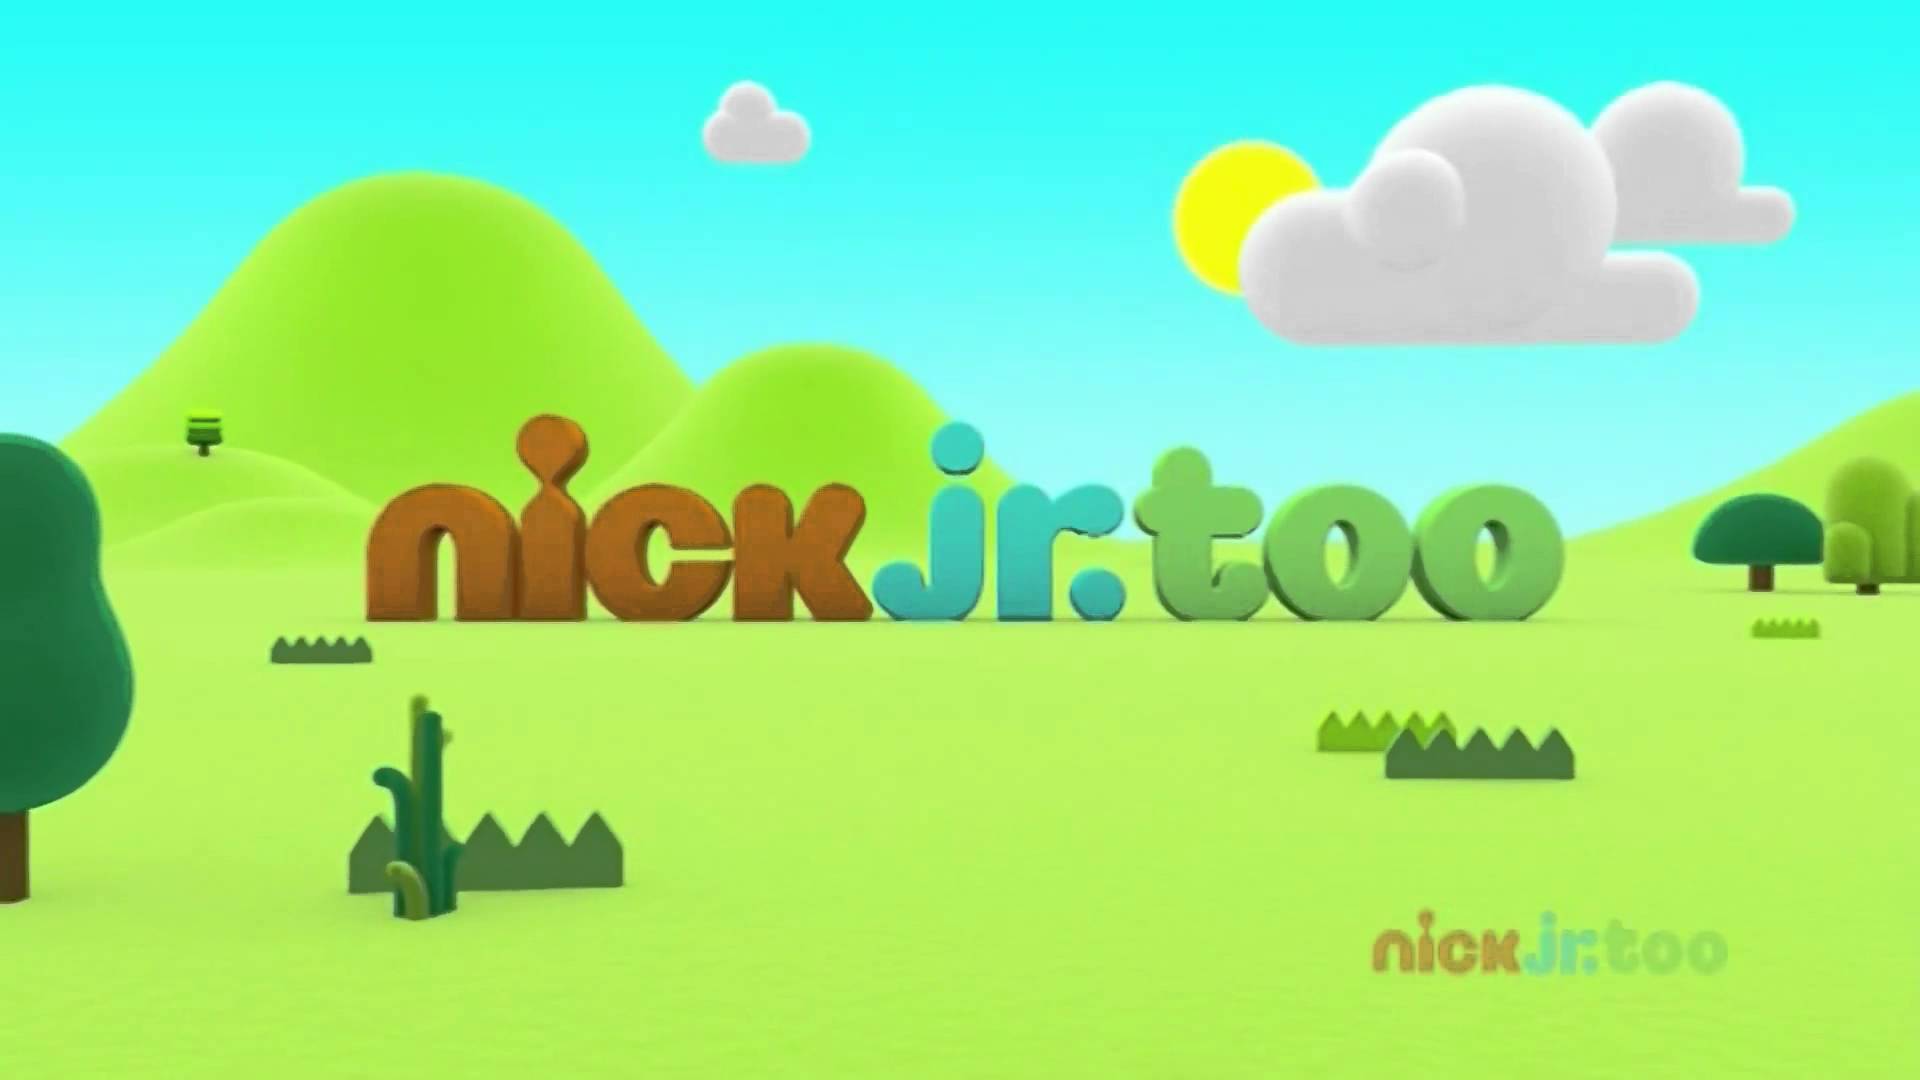 Nick Jr Too (UK) New Name Rebrand Continuity (03 11 2014) Formerly